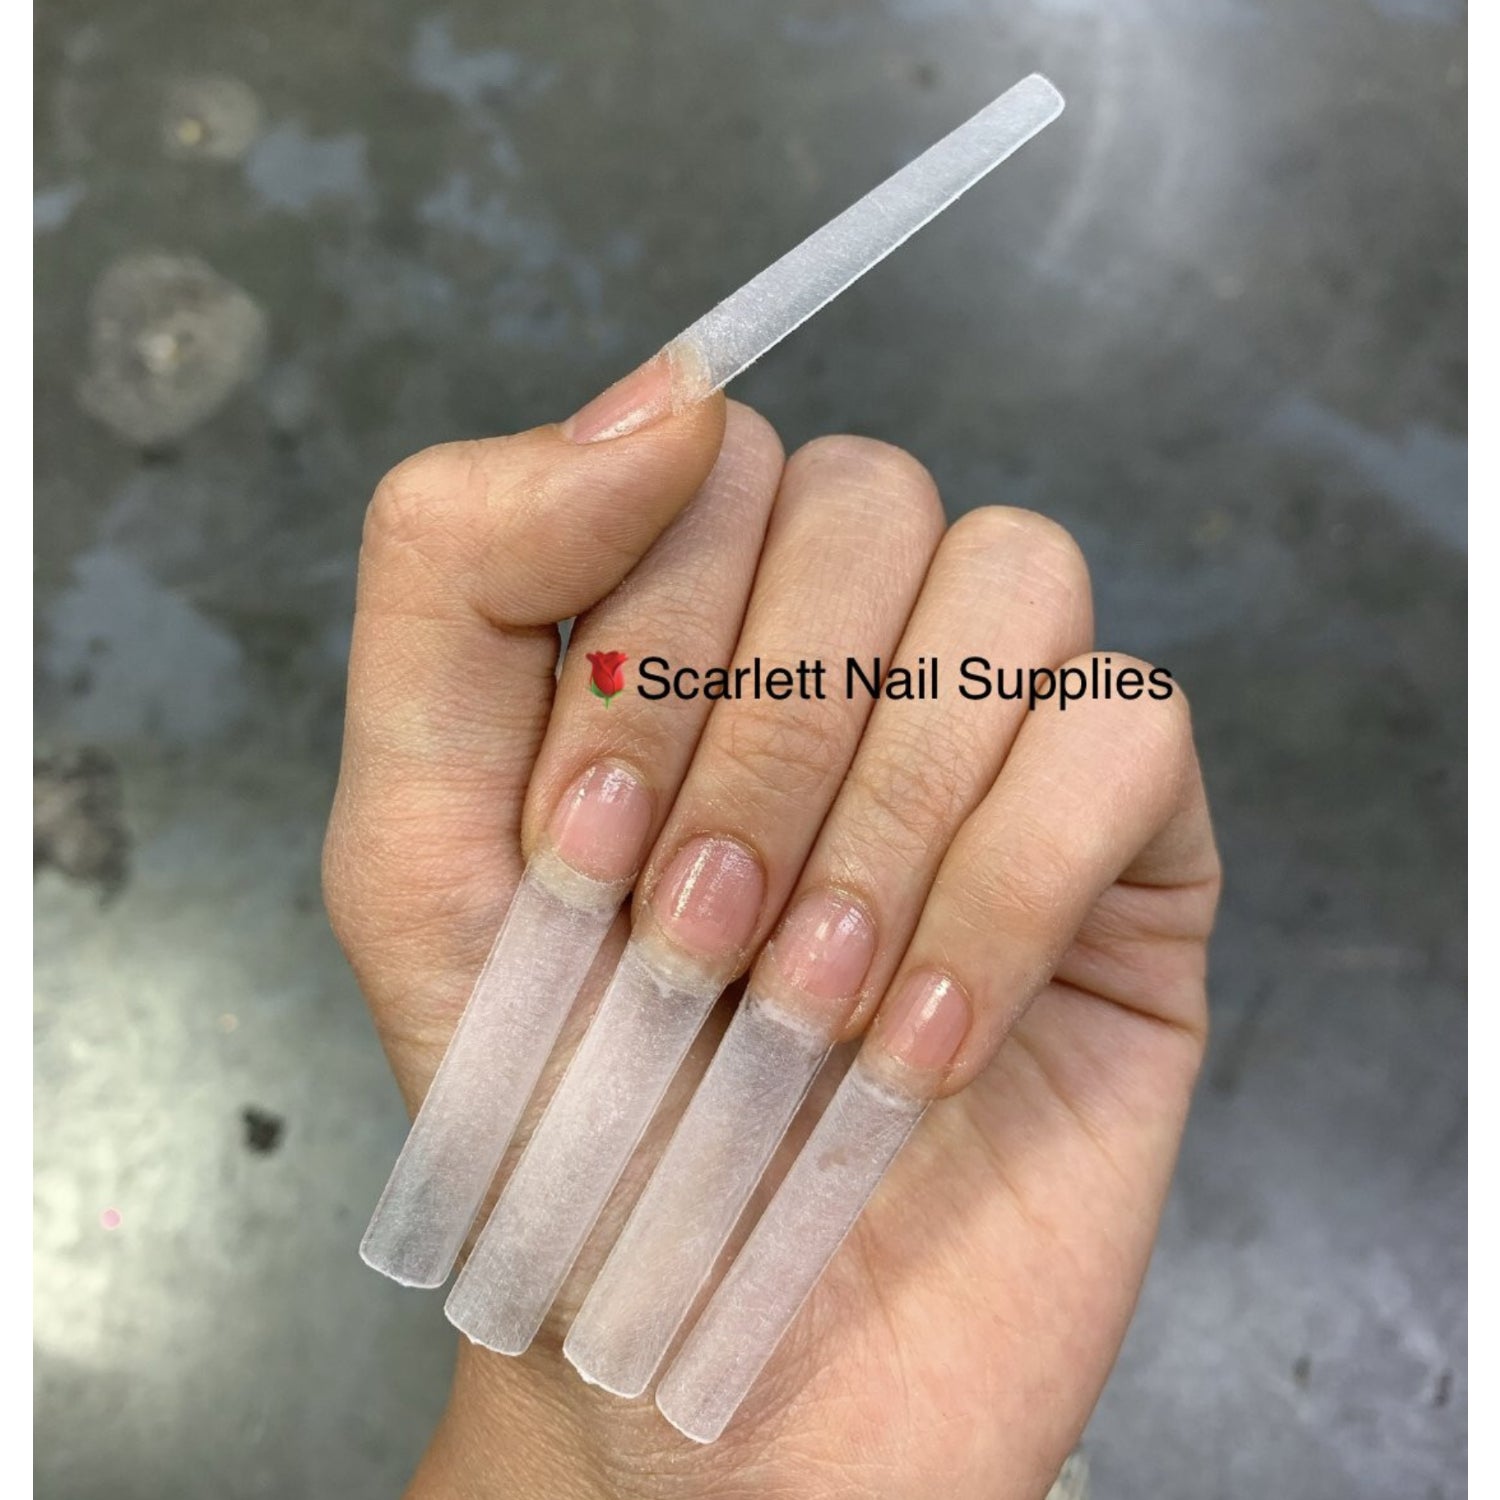 Flattened XXL Square NO C-CURVE Nail Tips easy to apply, for your clients who love the extra length square tips that will make their hands look flattering.